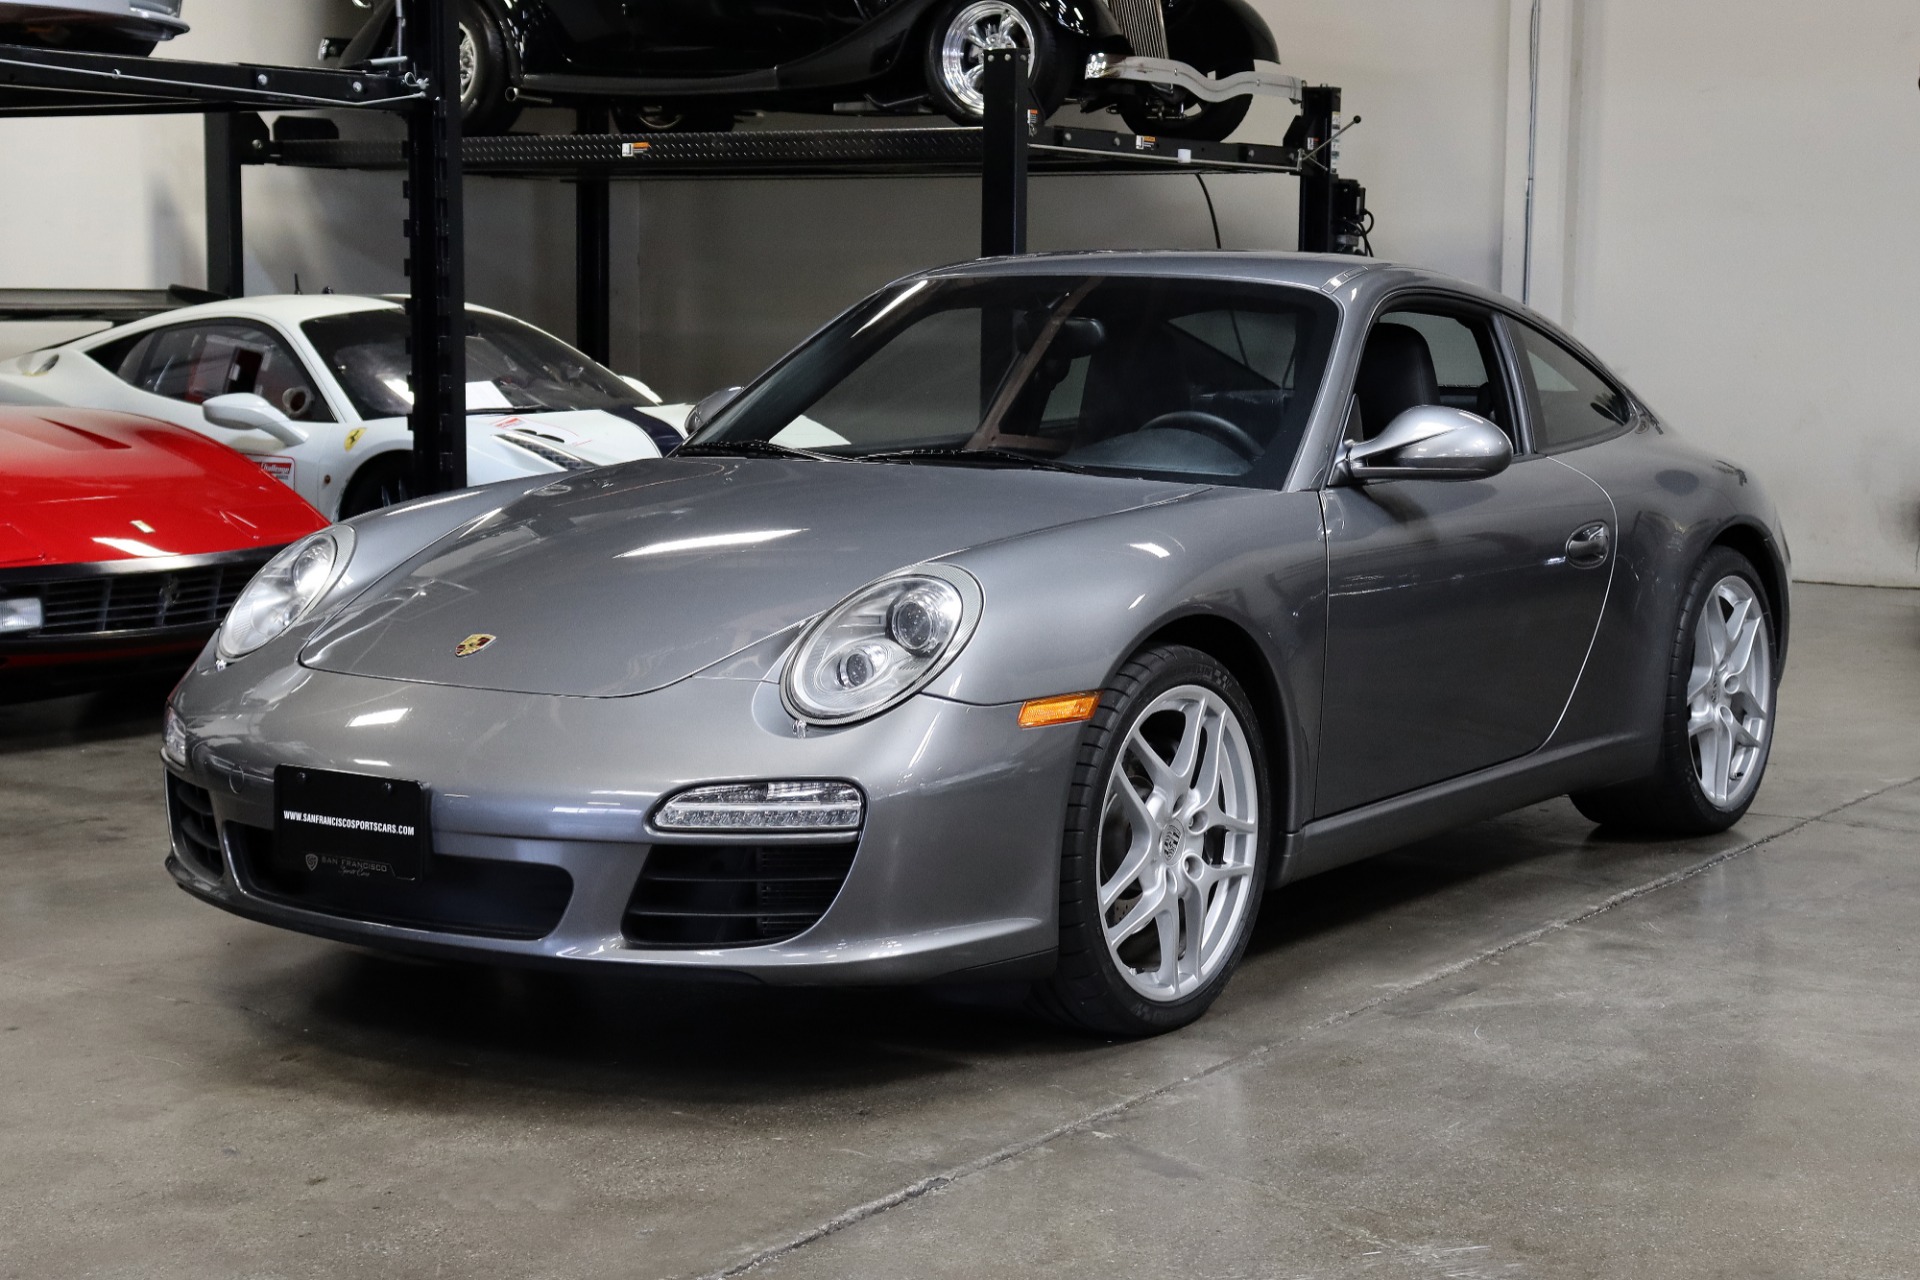 Used 2010 Porsche 911 For Sale ($44,995) | San Francisco Sports Cars ...